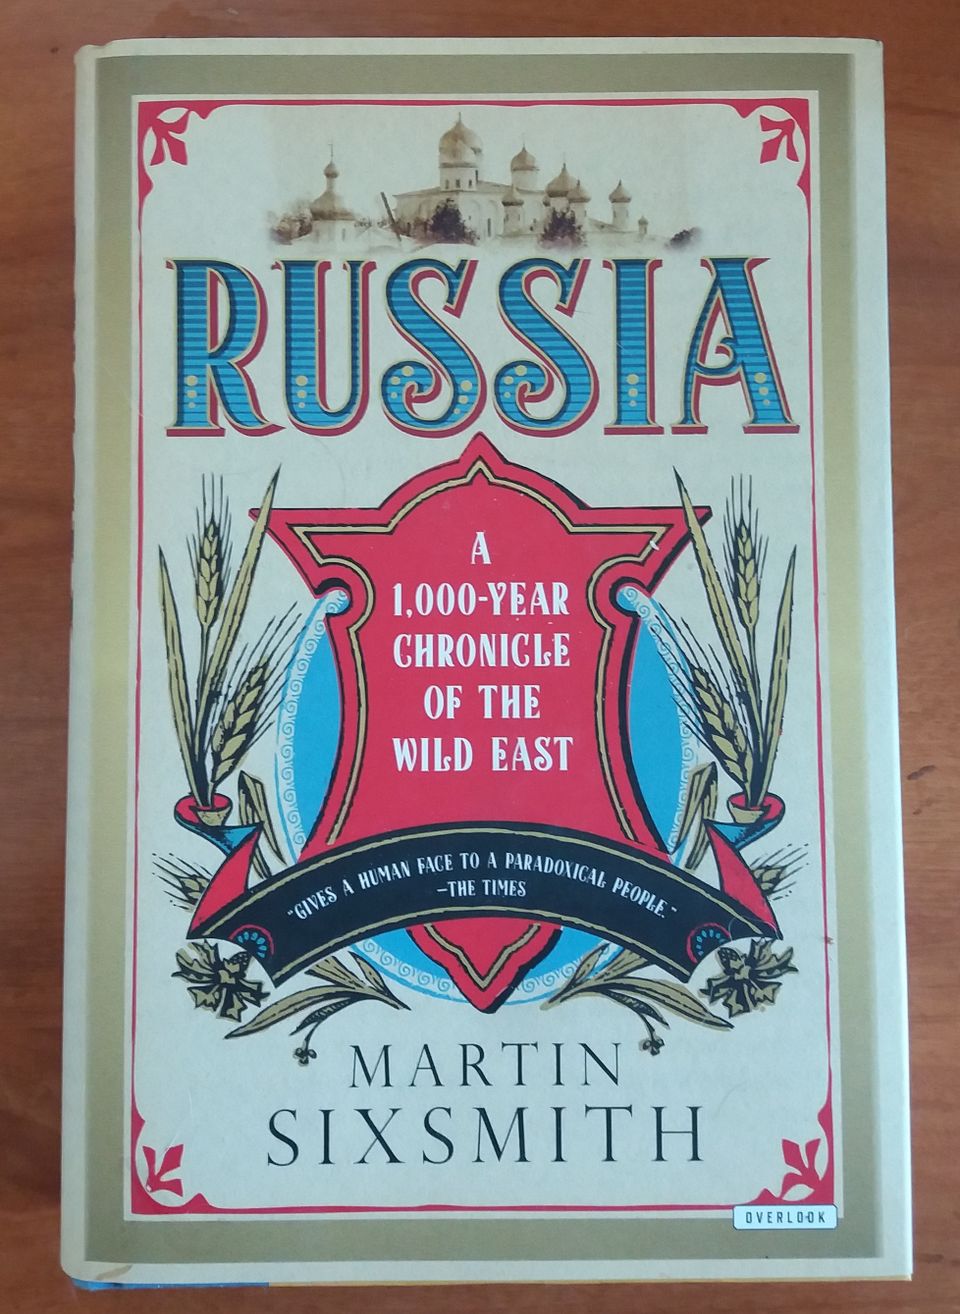 Martin Sixsmith RUSSIA - A 1,000-Year Chronicle of the Wild East